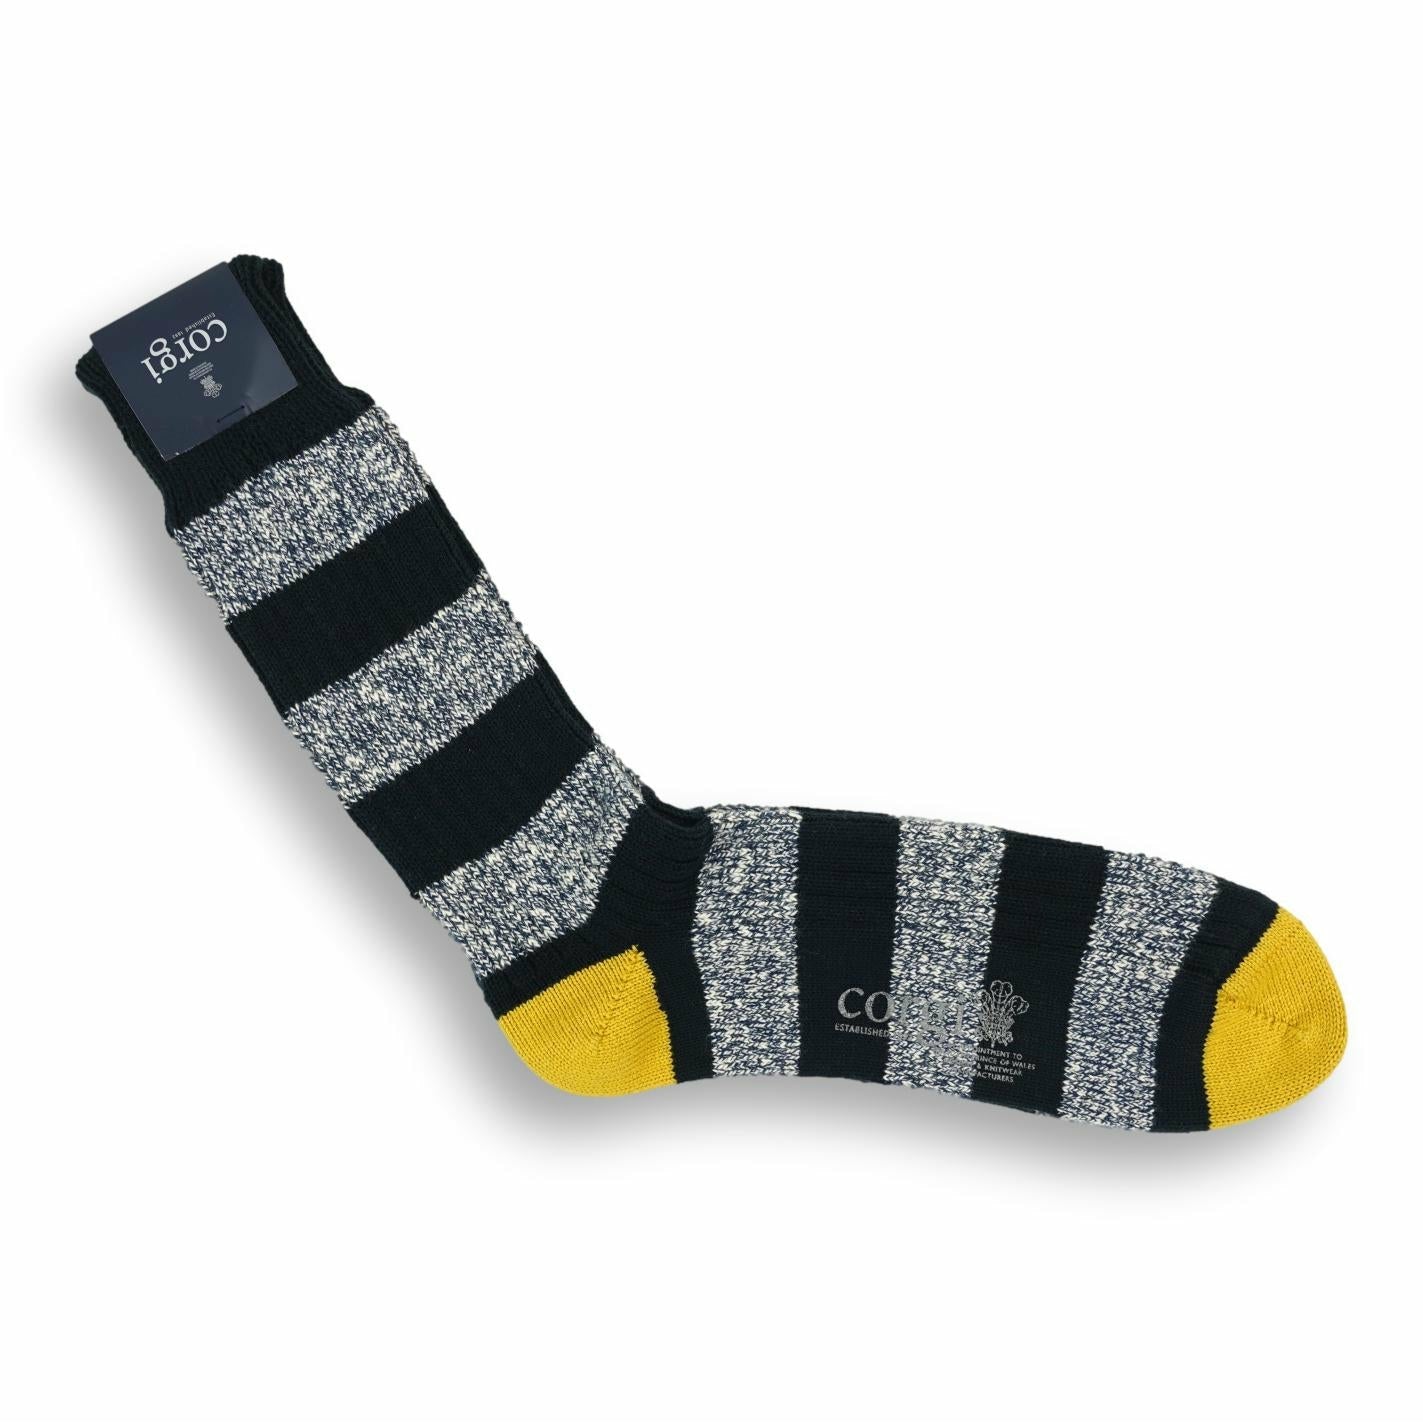 Pure Cotton Stripe with Contrast Toe and Heel Sock